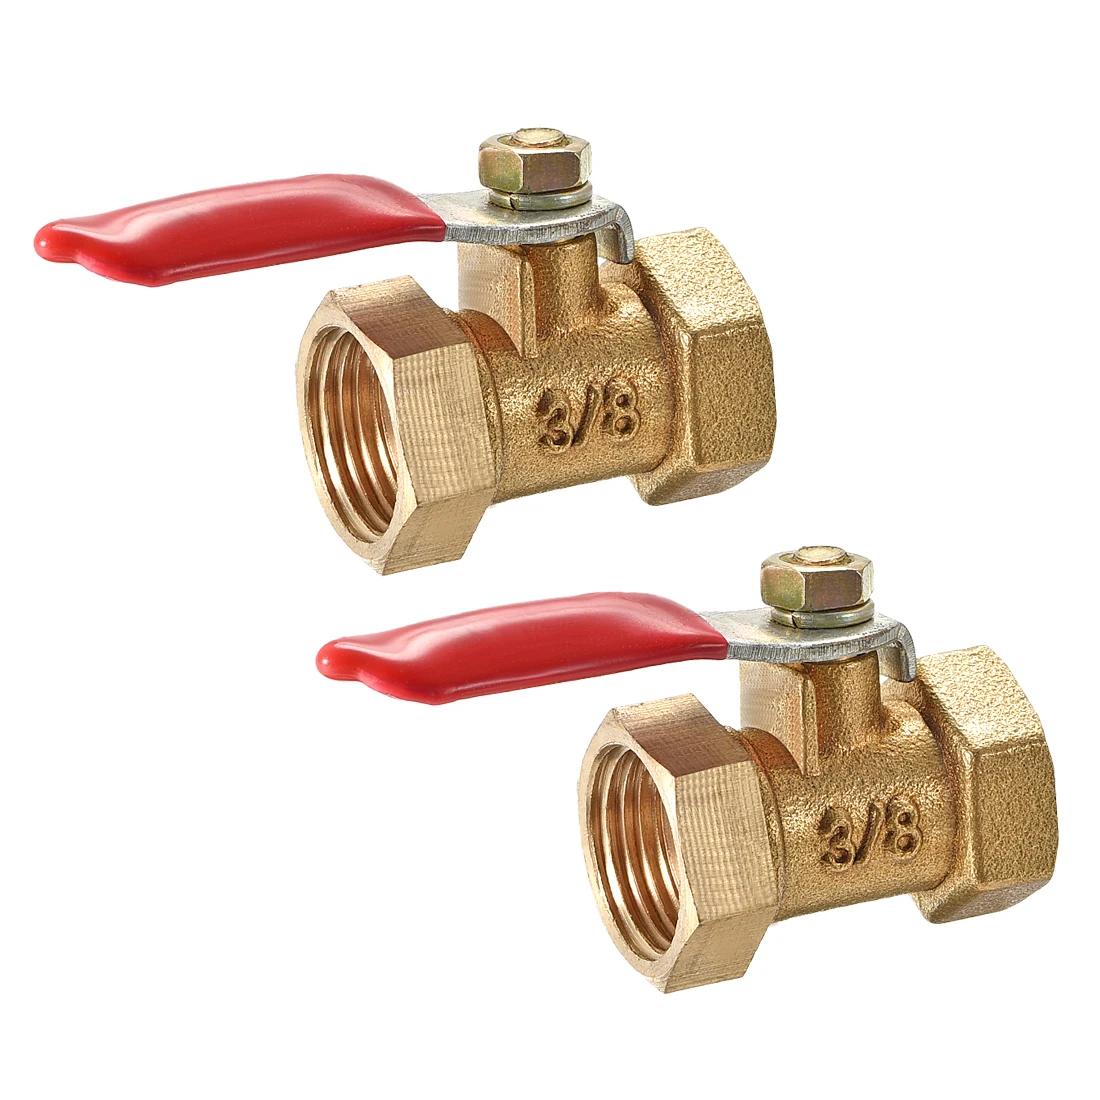 

uxcell Brass Air Ball Valve Shut Off Switch G3/8 Female to Female Pipe Coupler 2Pcs